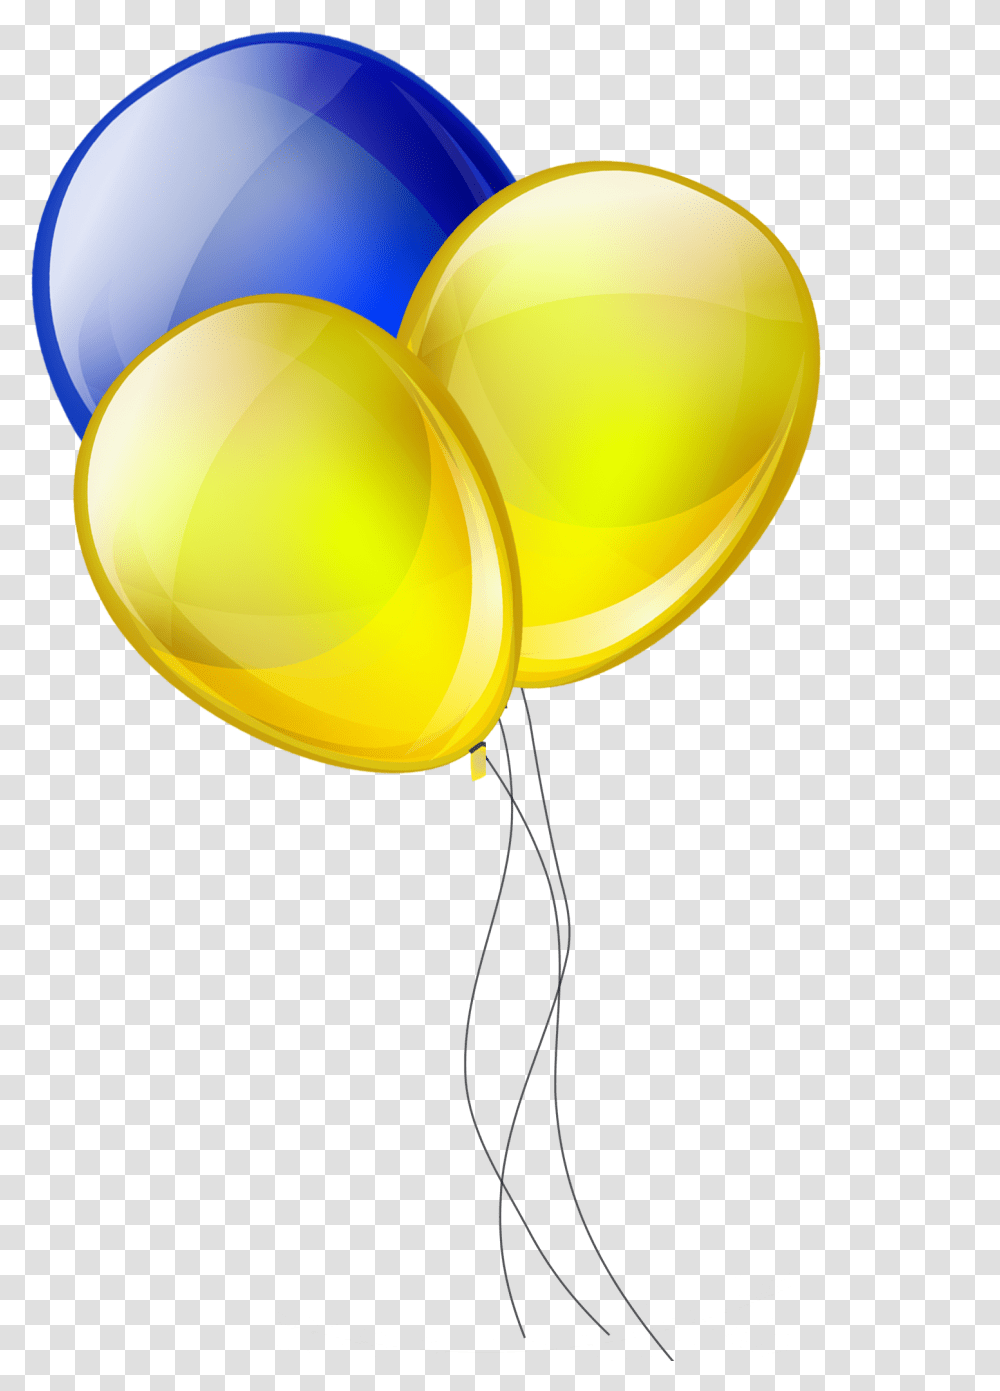 Contact Blue And Gold Balloons Clipart Blue And Gold Balloons Clipart, Sphere, Lamp Transparent Png